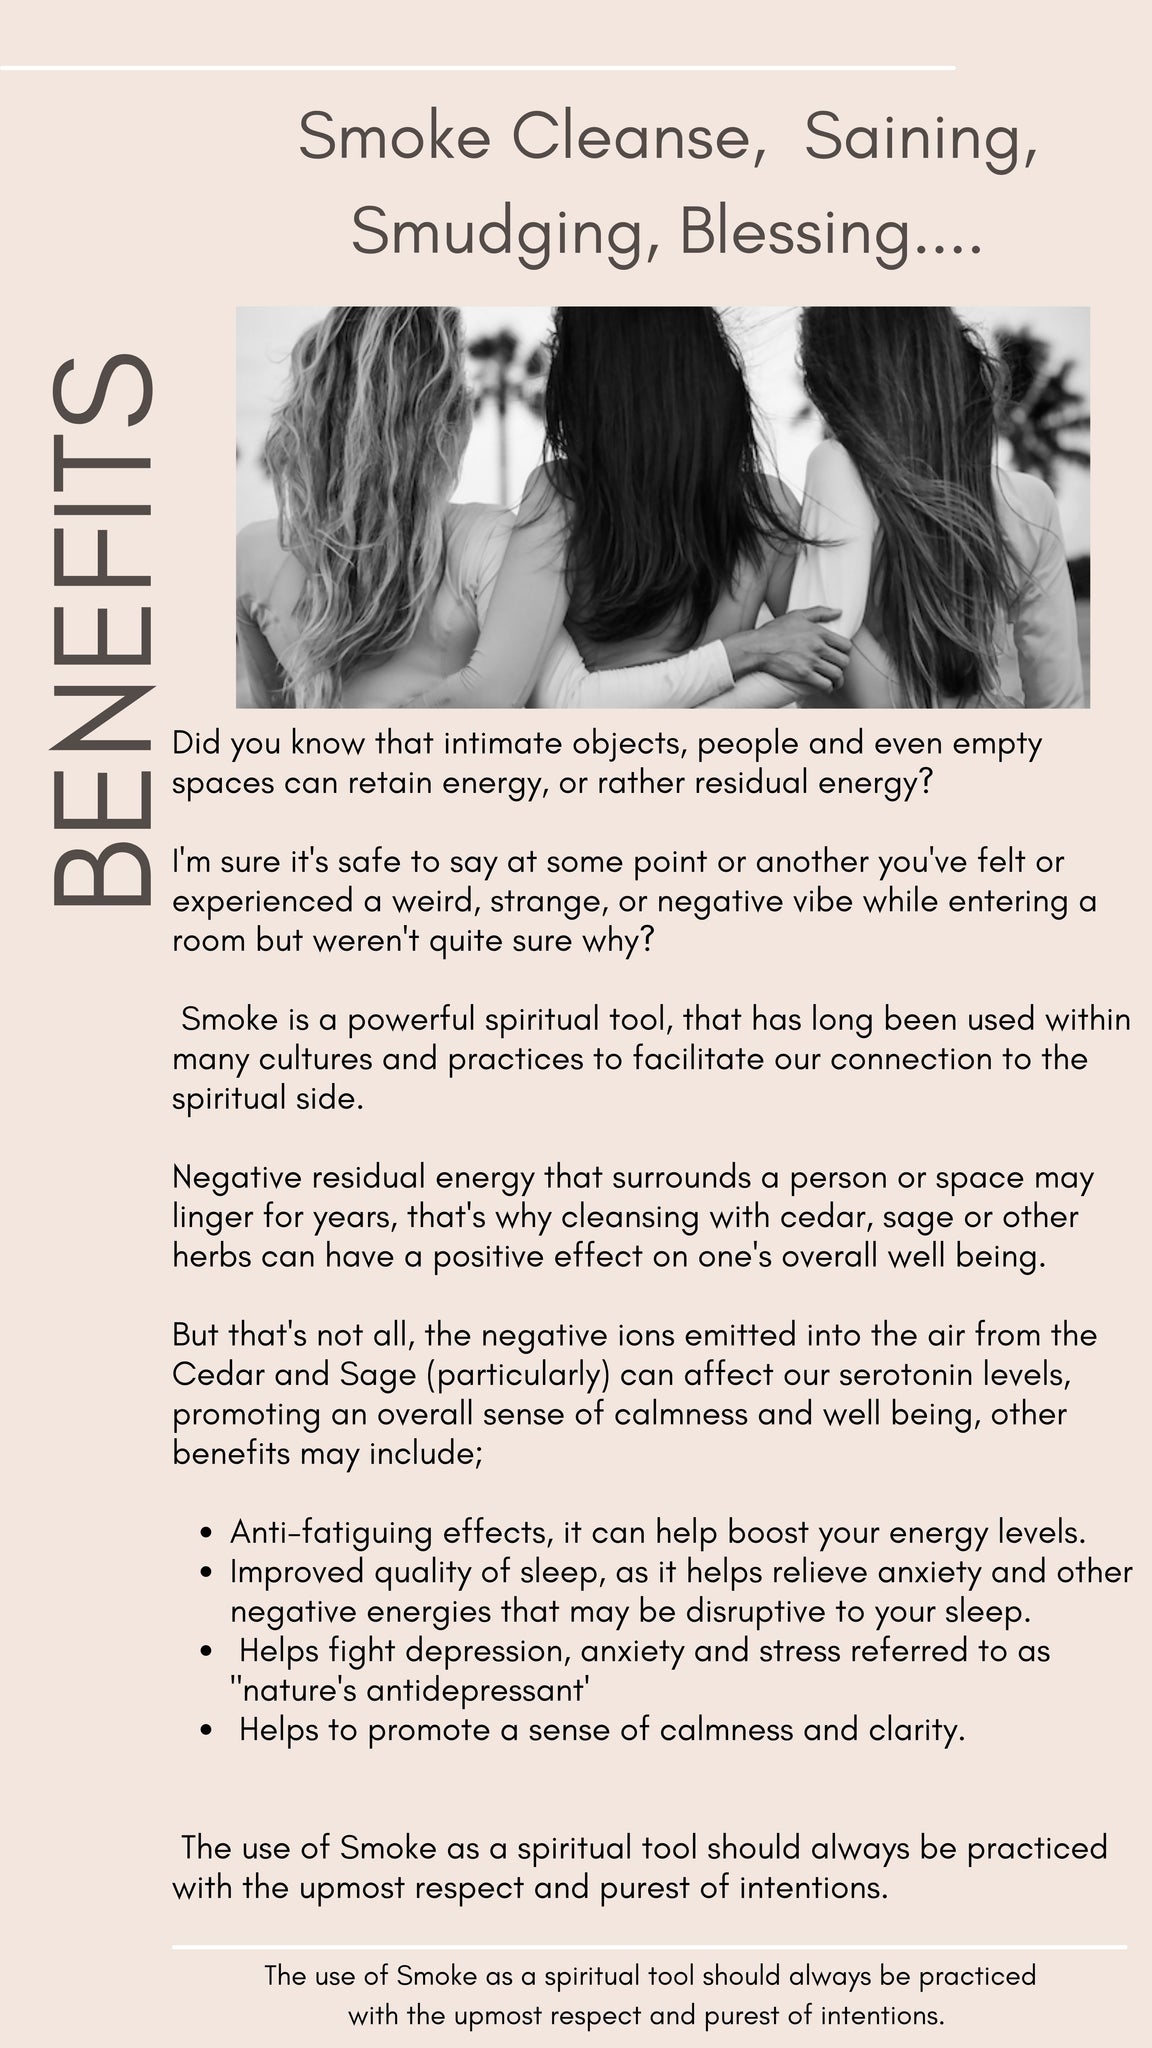 benefits of smudging, smoke cleanse, saining or blessing